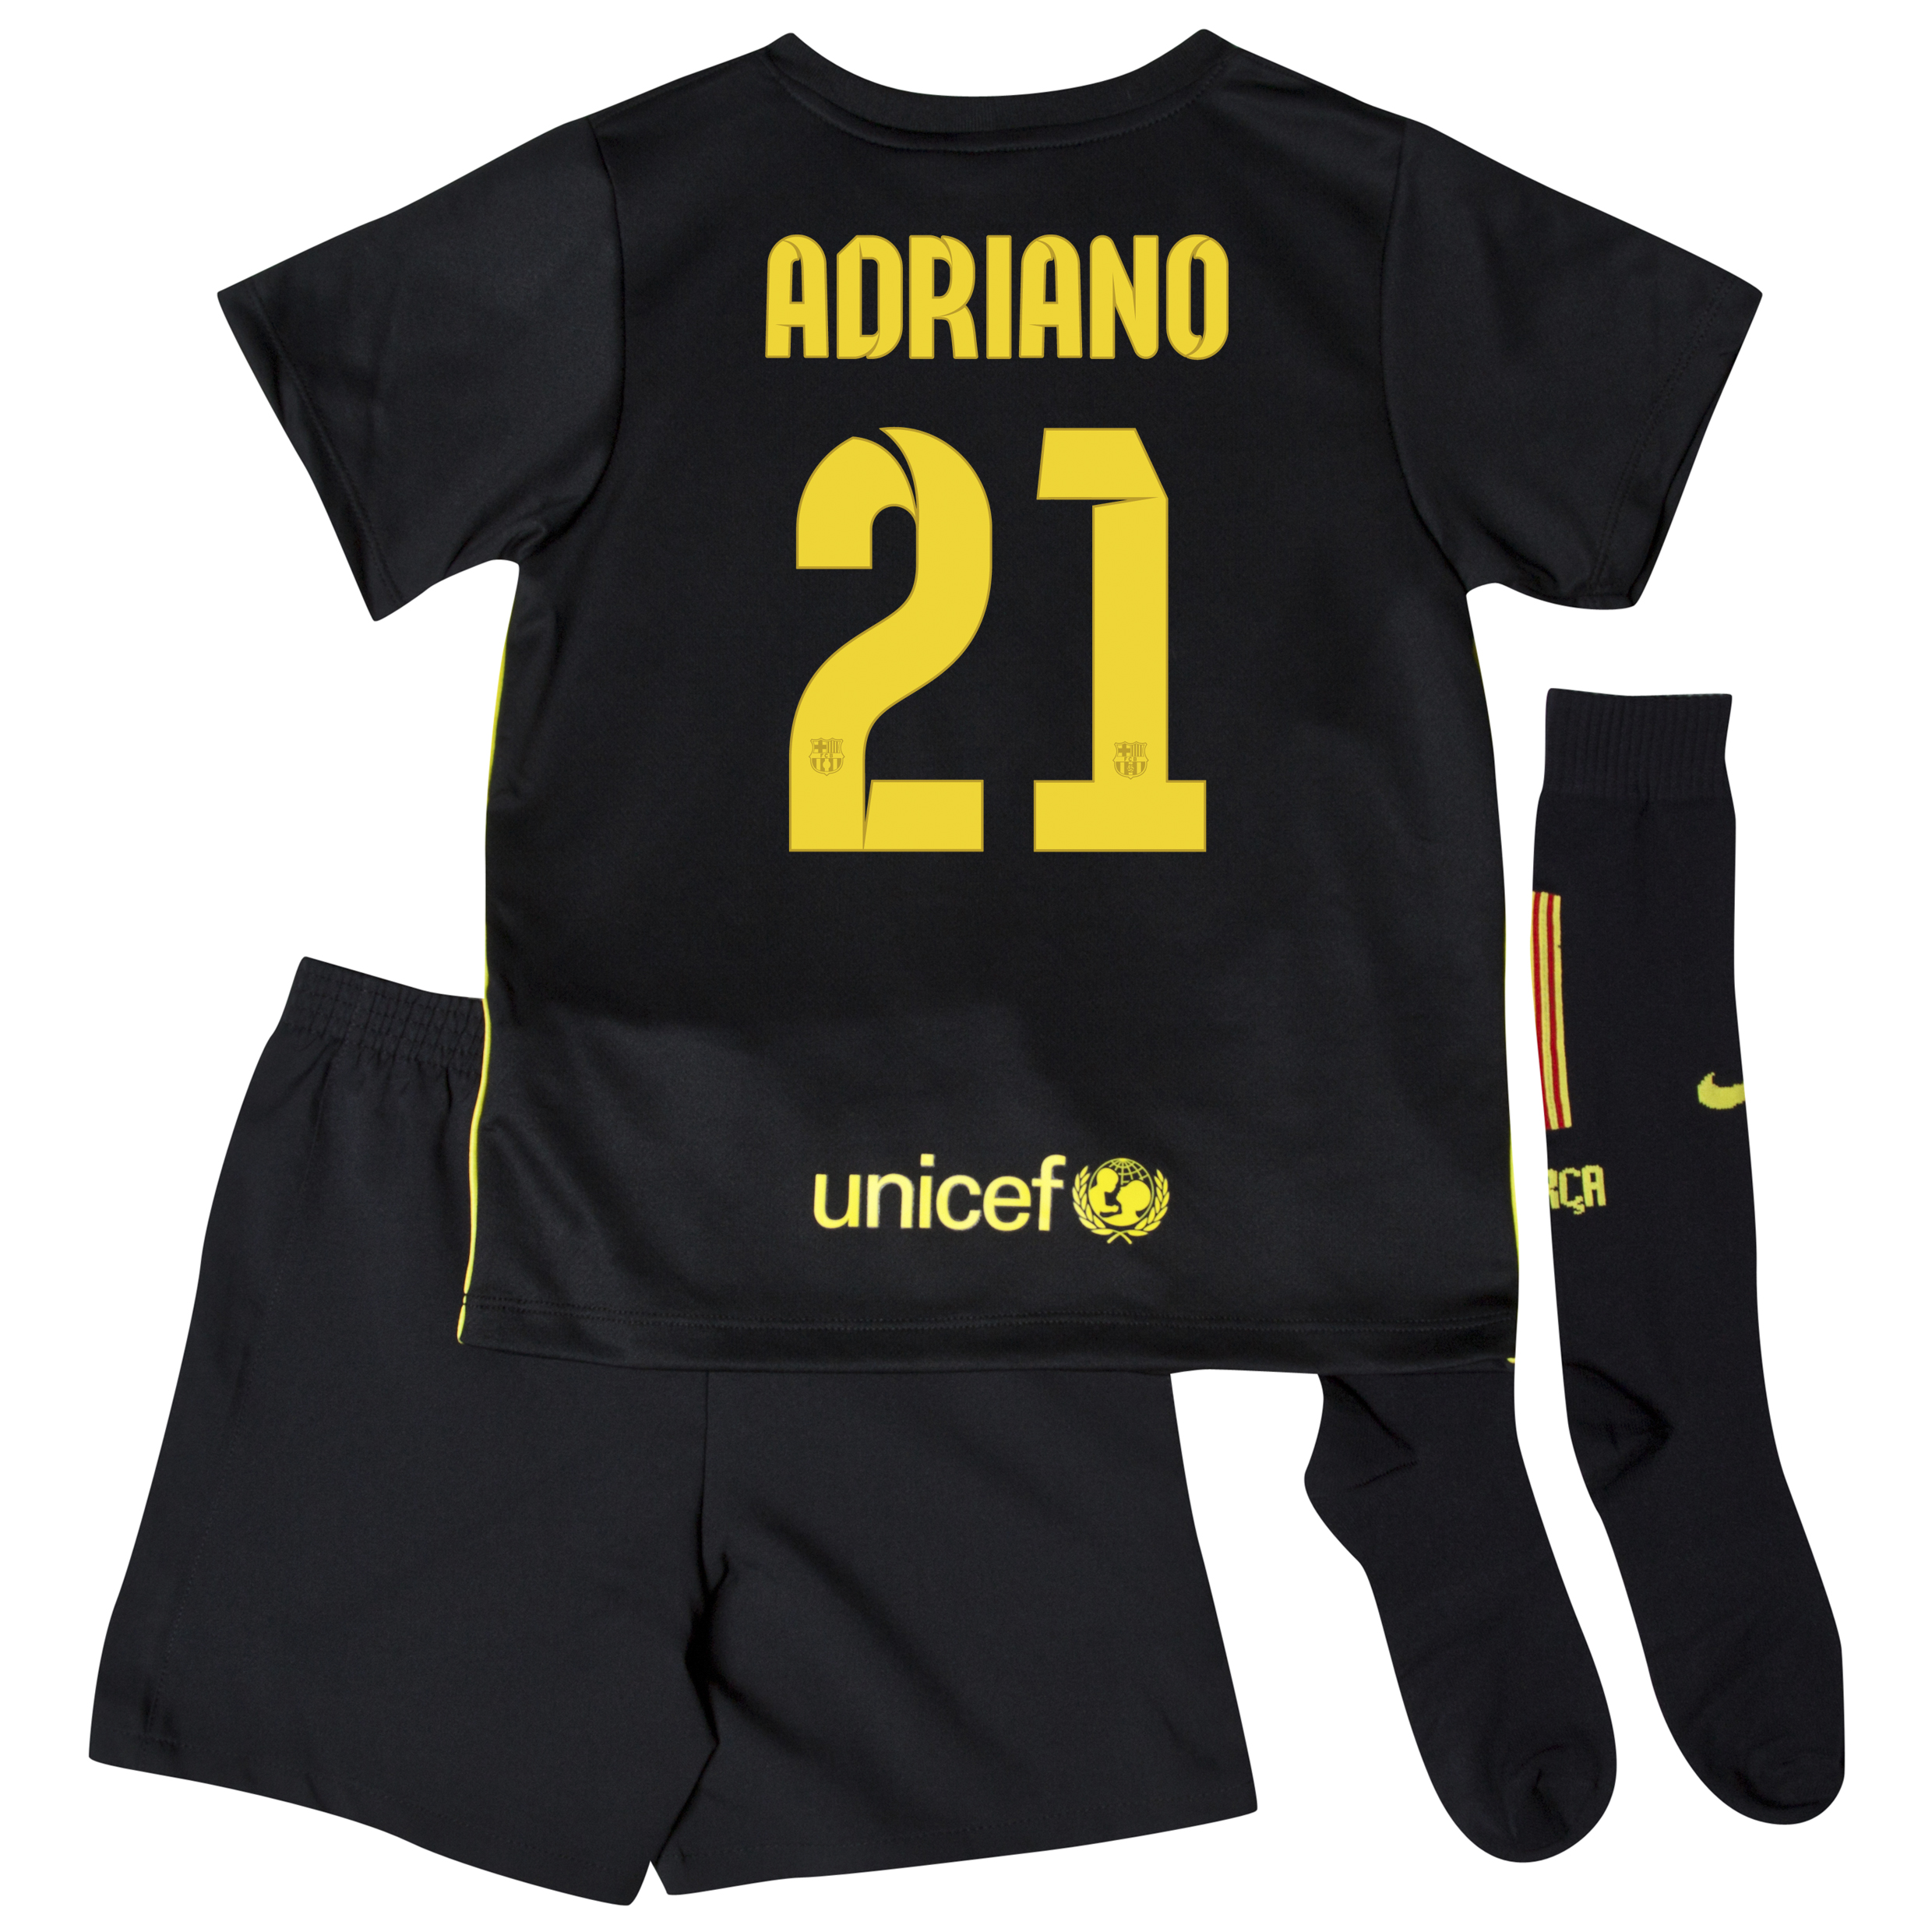 Barcelona Third Kit 2013/14 - Little Boys with Adriano 21 printing